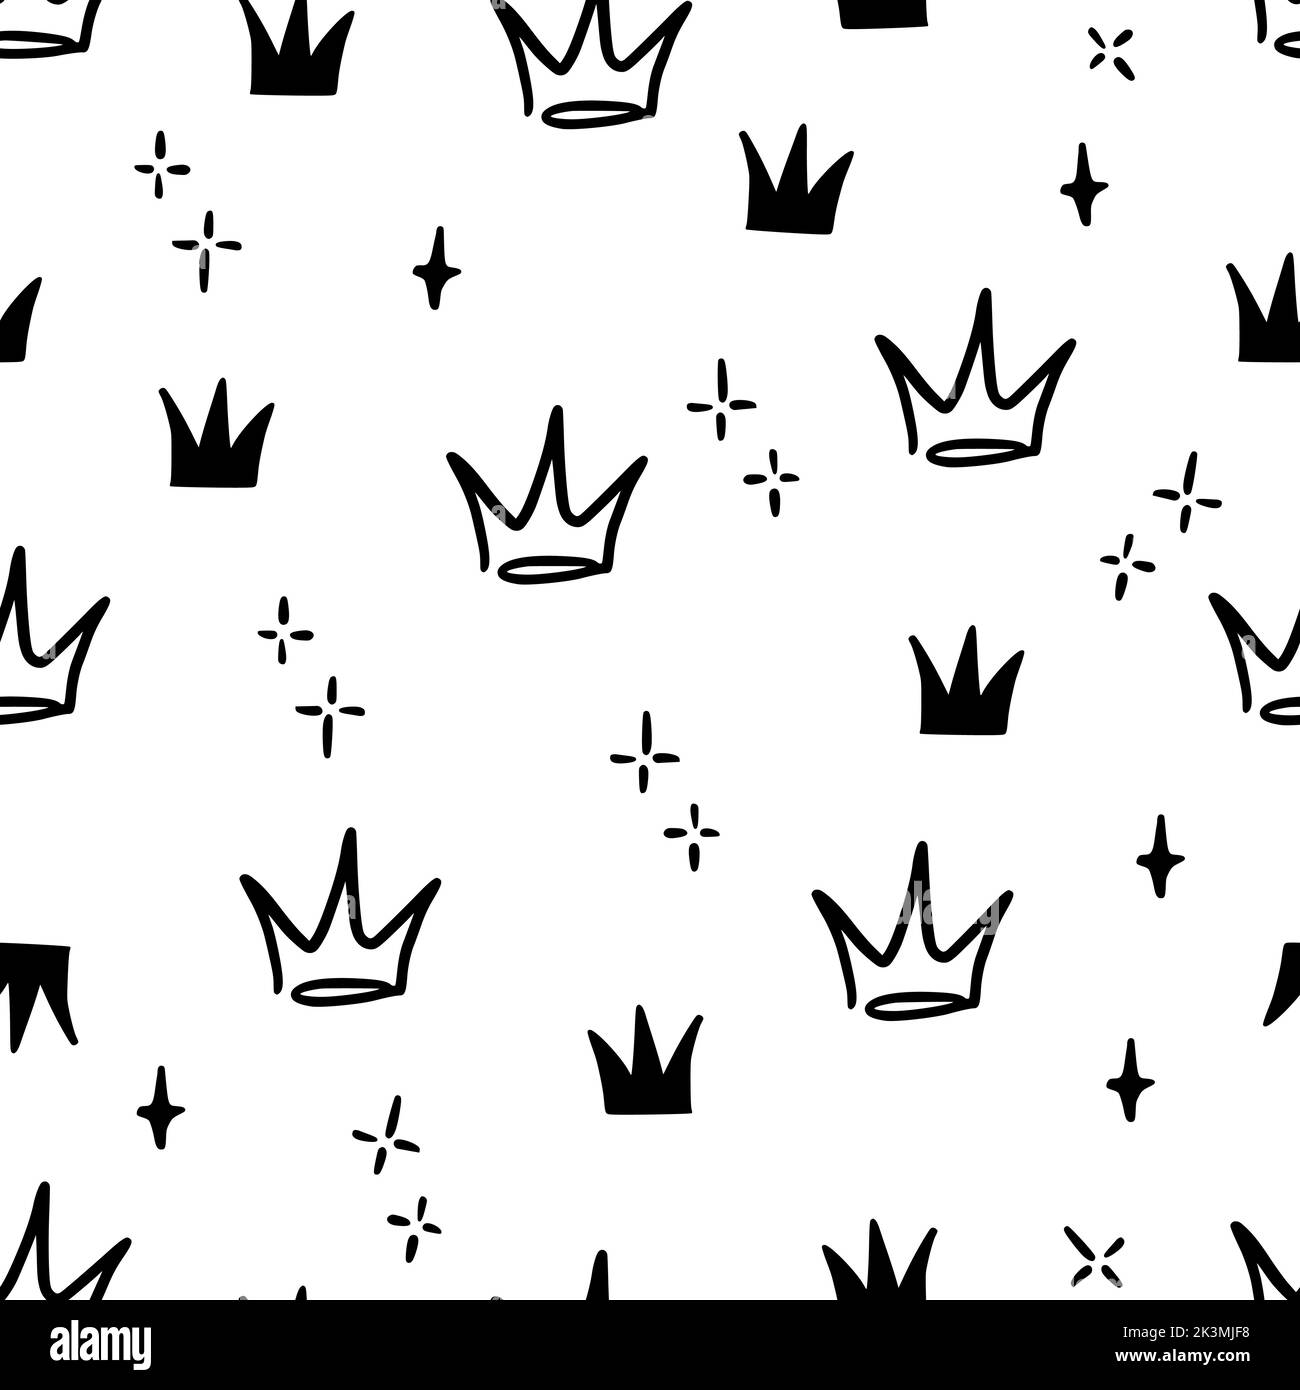 Love king queen card Black and White Stock Photos & Images - Alamy